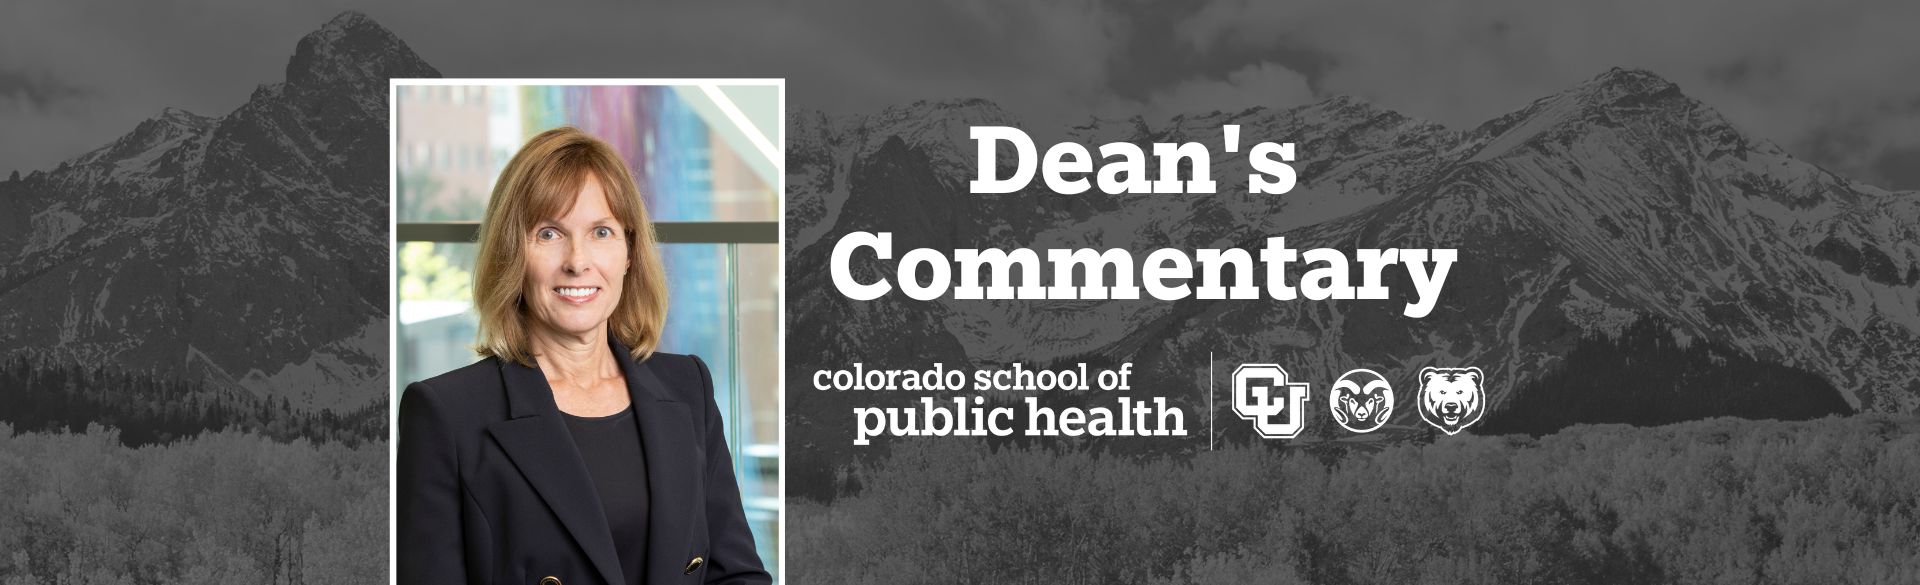 Dean's Commentary with Cathy Bradley and black and white mountain background